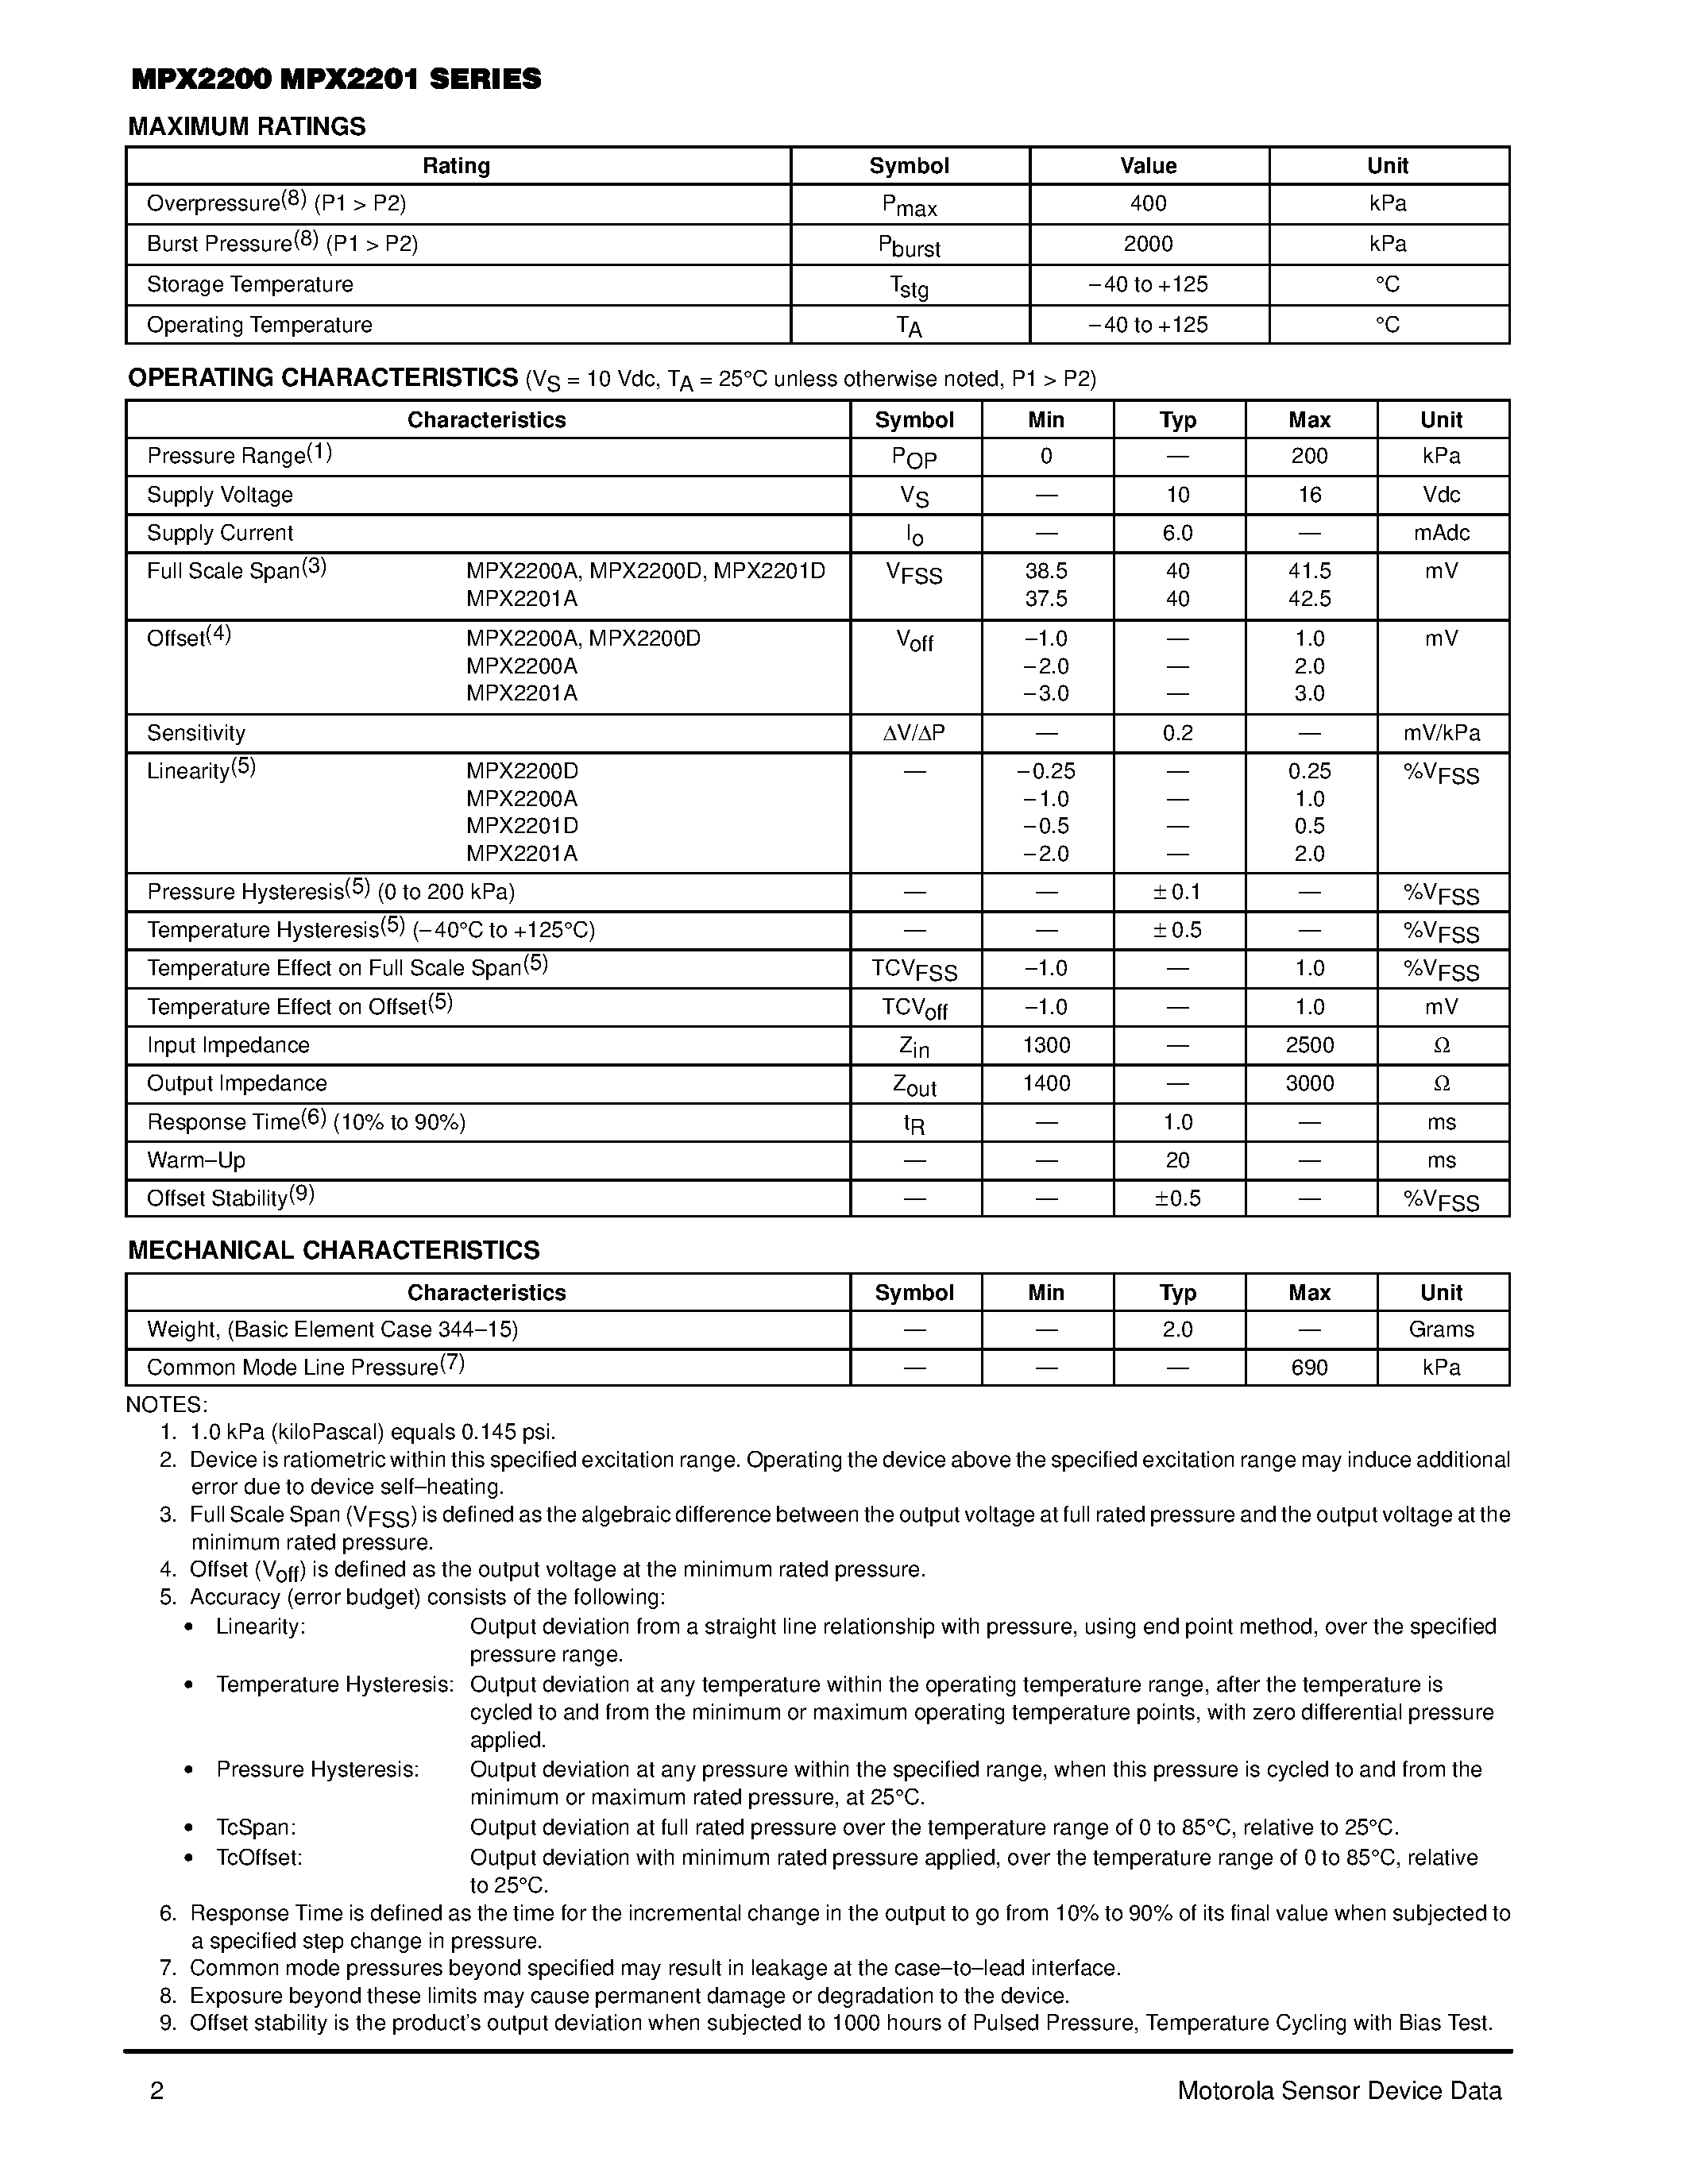 Datasheet MPX2200 - (MPX2200 / MPX2201) 0 to 200 kPa (0 to 29 psi) 40 mV FULL SCALE SPAN (TYPICAL) page 2